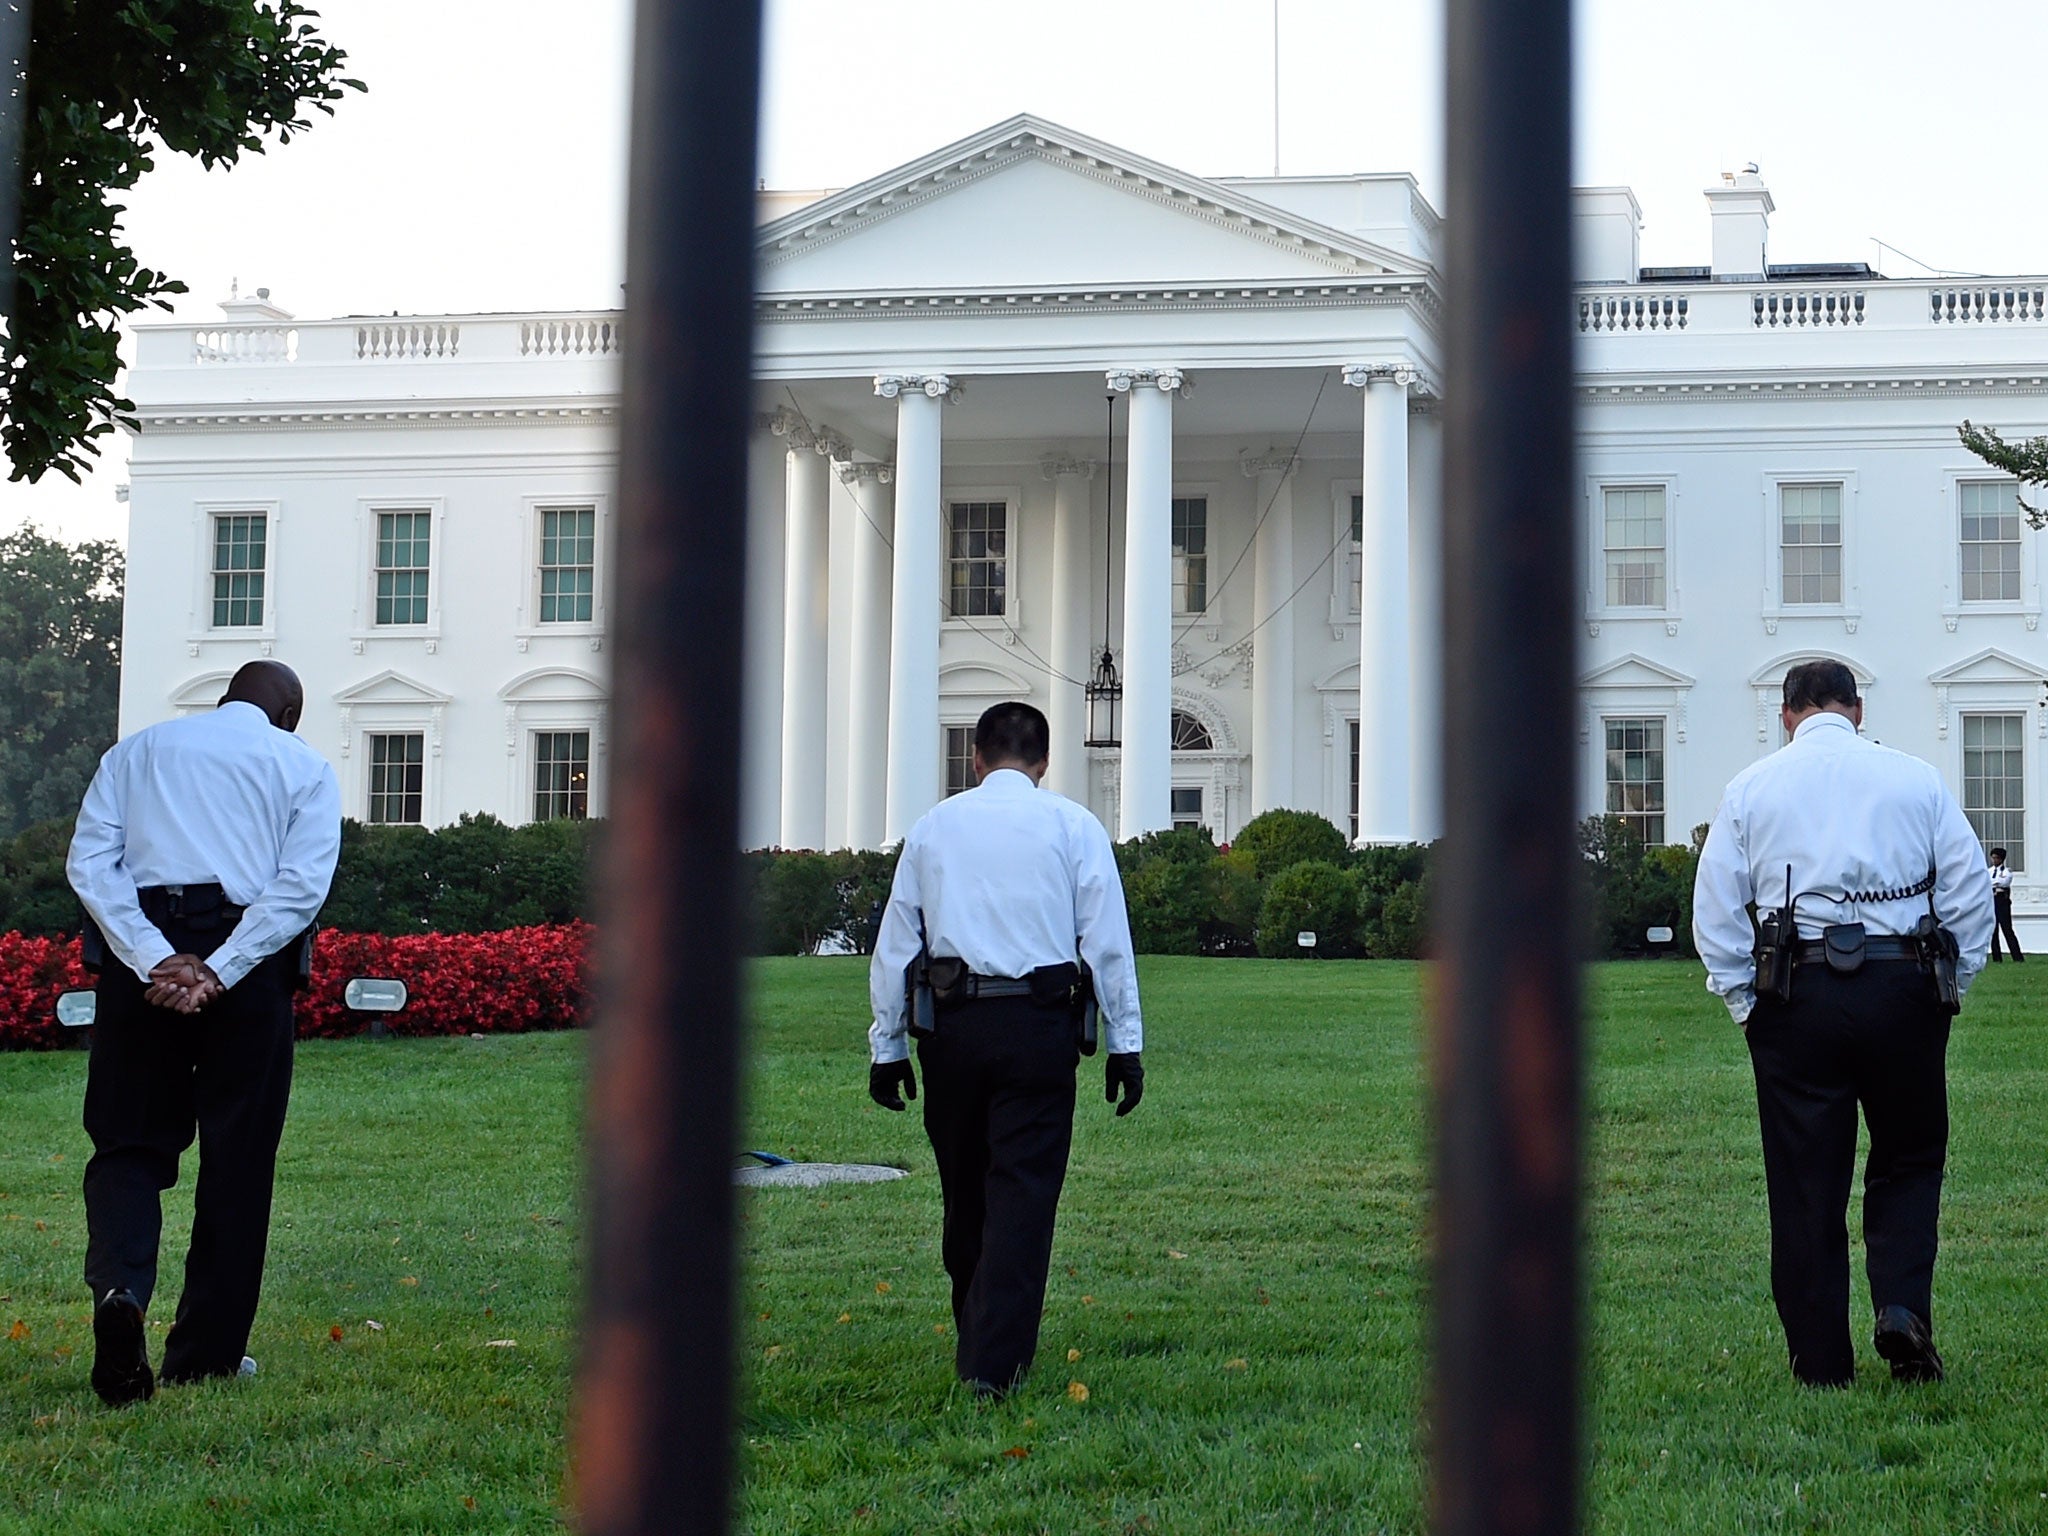 The Secret Service has been shown up in a damning new report detailing how an intruder wielding a knife was able to get deep inside the White House